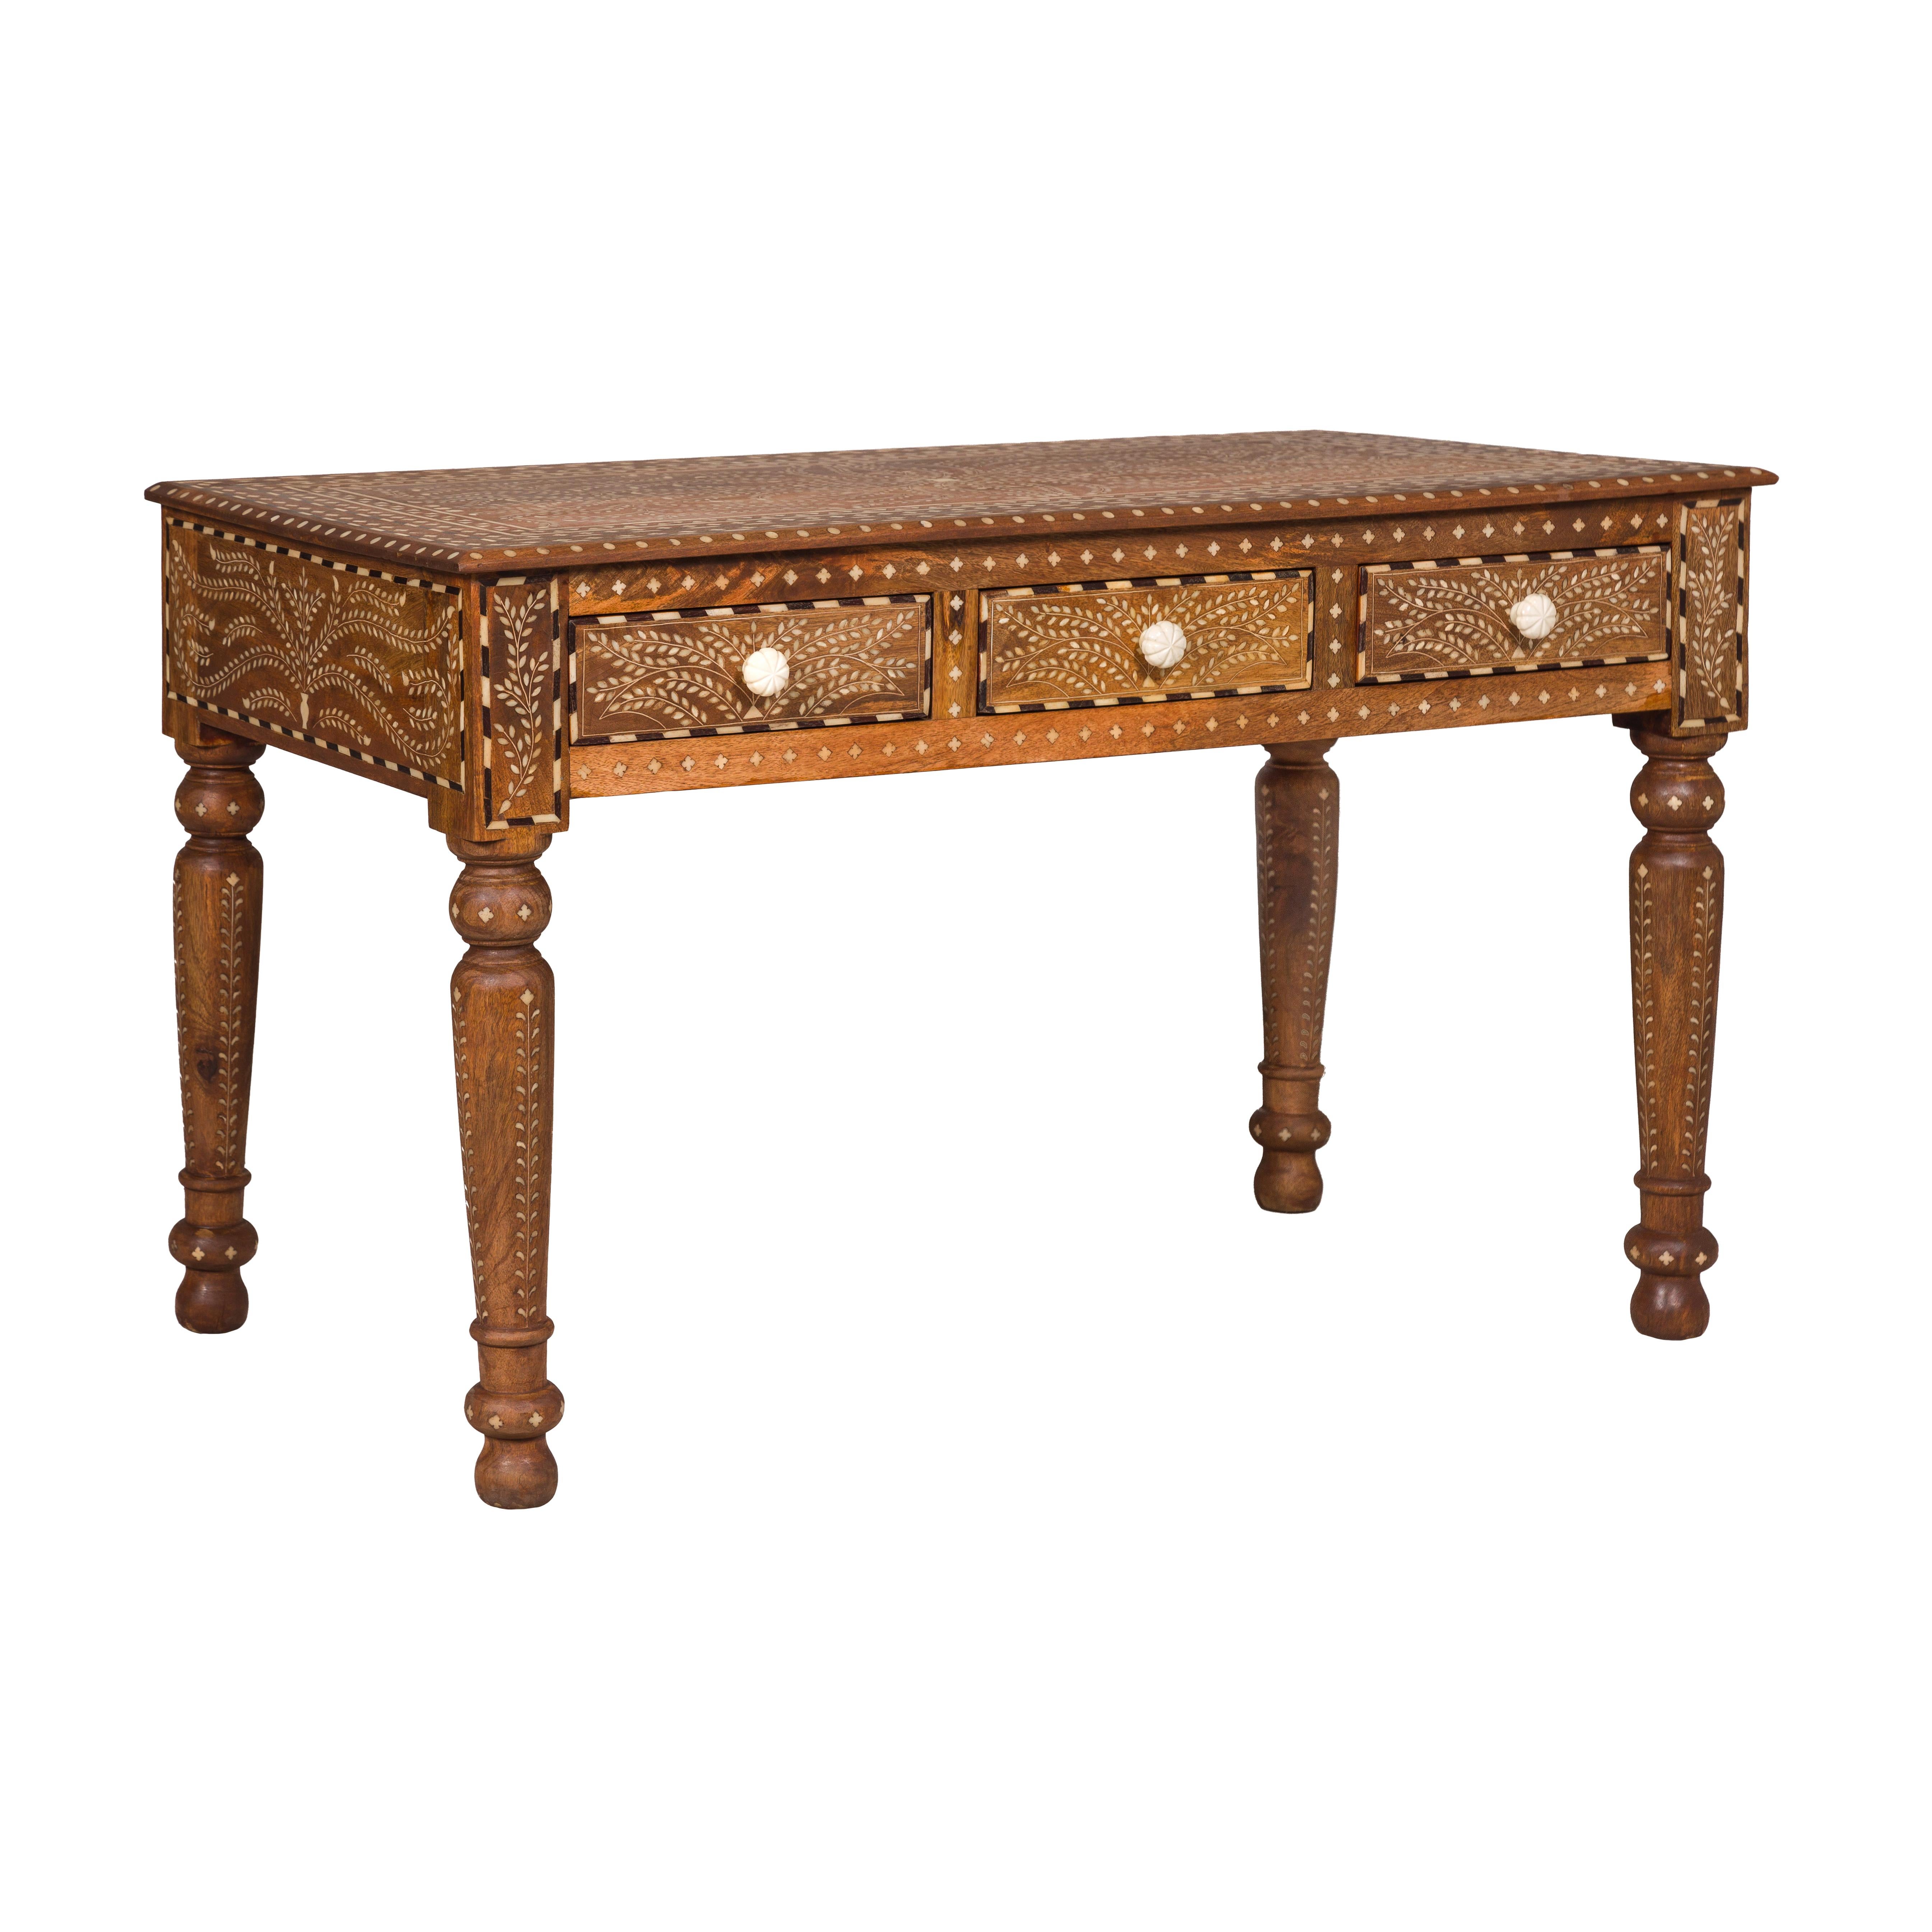 Anglo Indian Style Mango Wood Console or Desk with Three Drawers and Bone Inlay For Sale 12